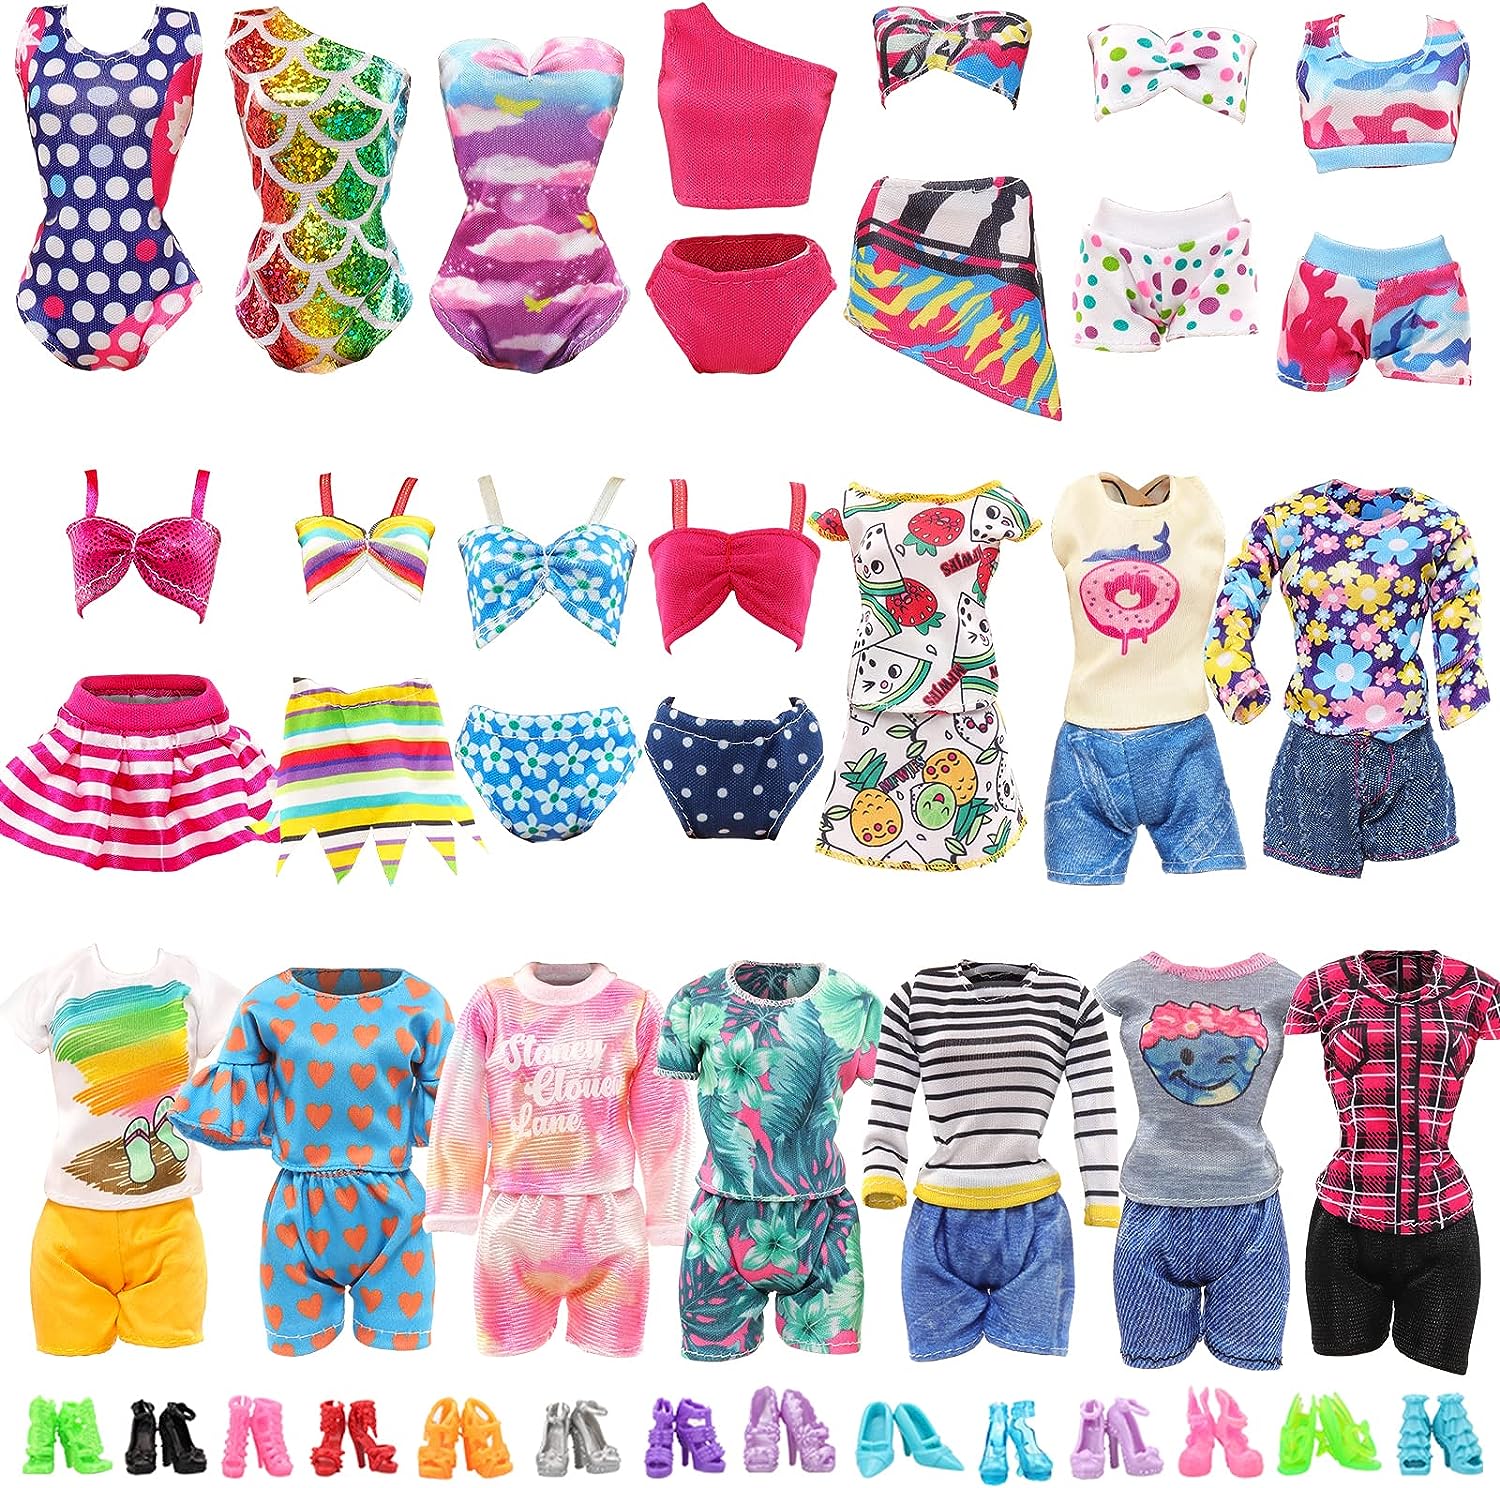 Barwa Barwa American Doll Girl Doll Clothes And Accessories 5 Sets